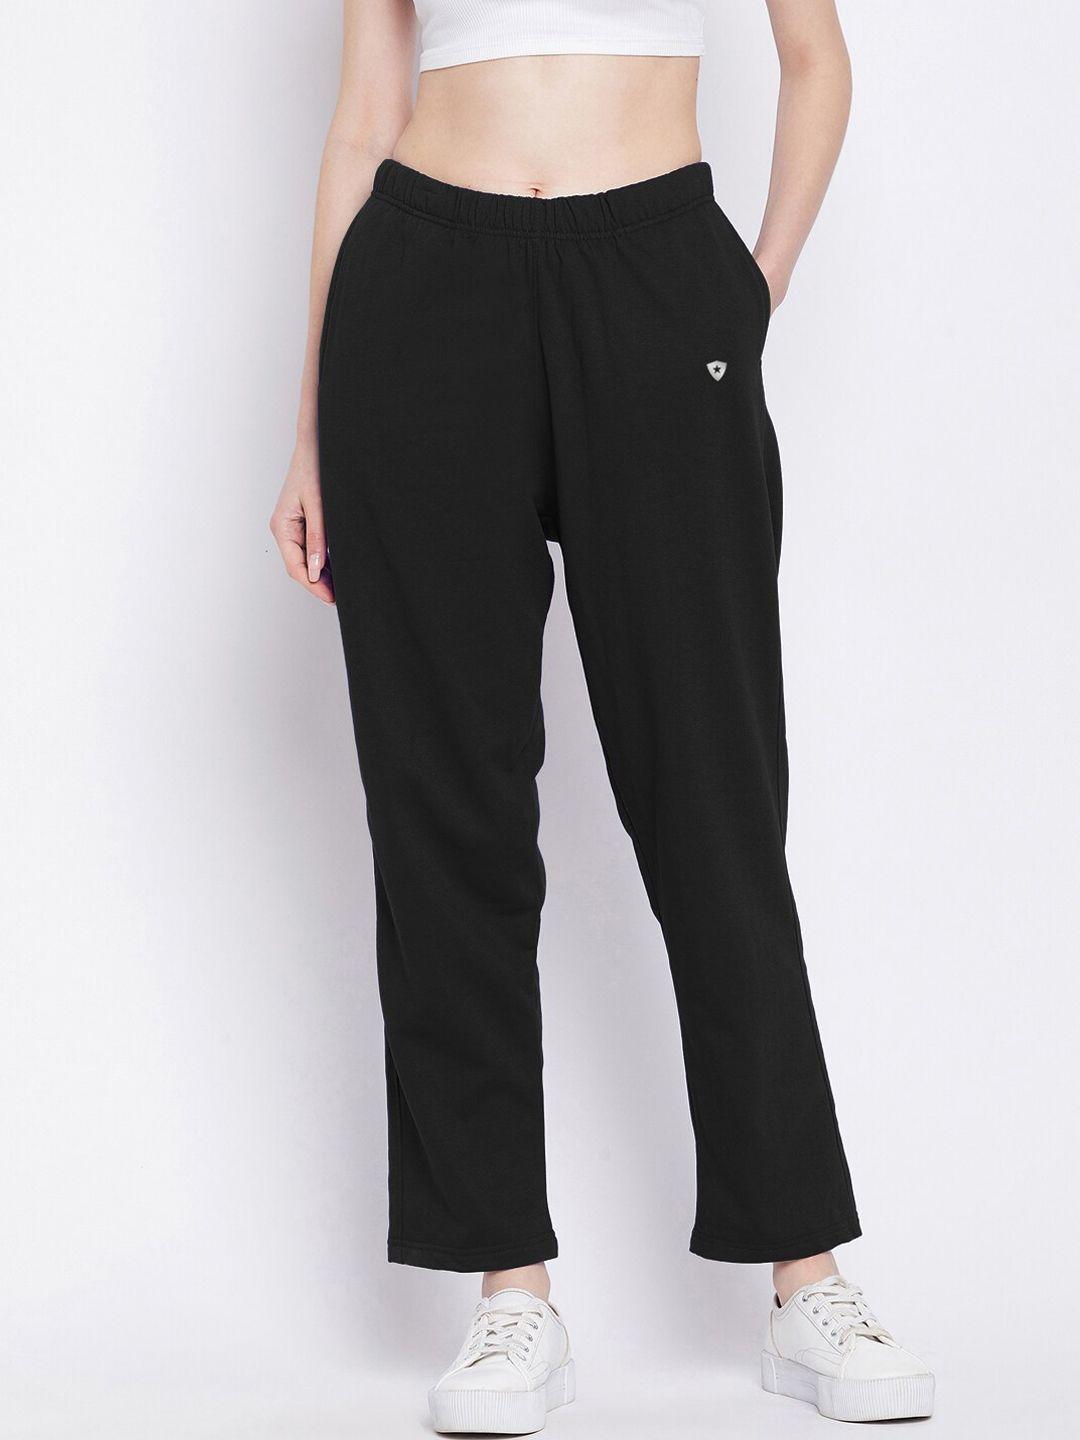 french flexious women black solid relaxed fit, dry-fit, anti odour & anti bacteria track pants